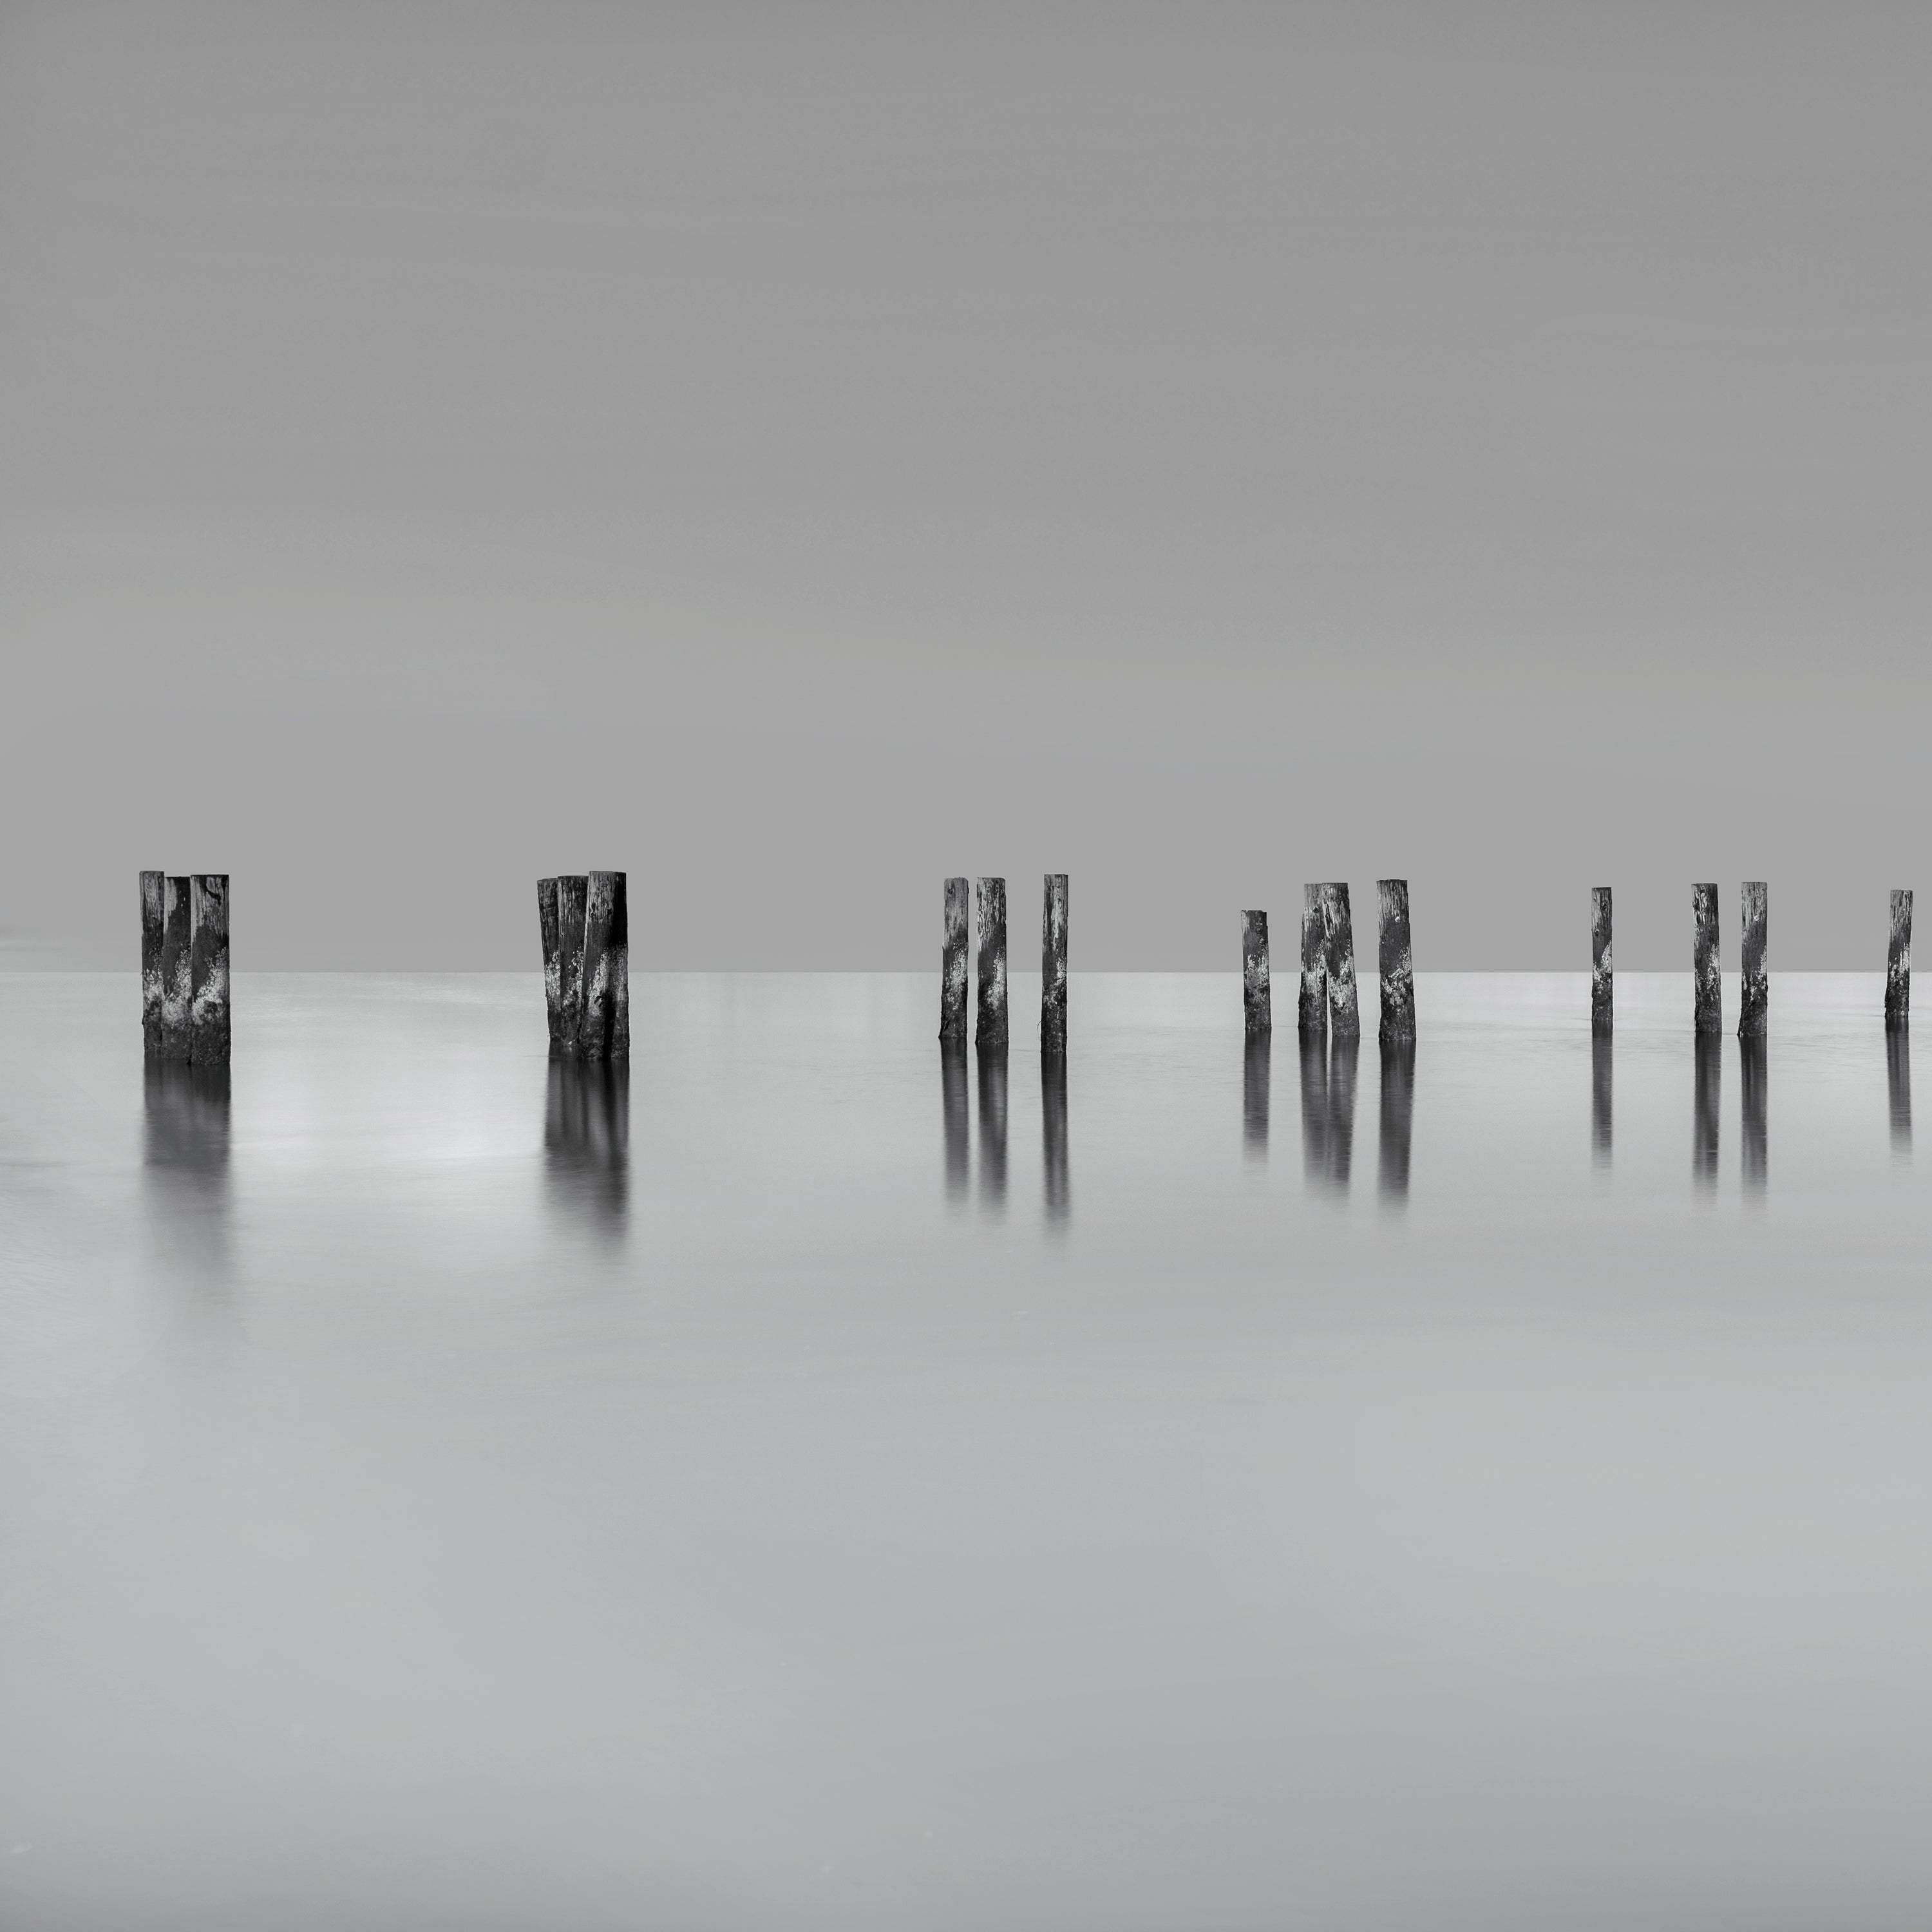 Posts stemming from the water about 3 feet up.  The posts are textured and striped.  The image is long exposure fine art.